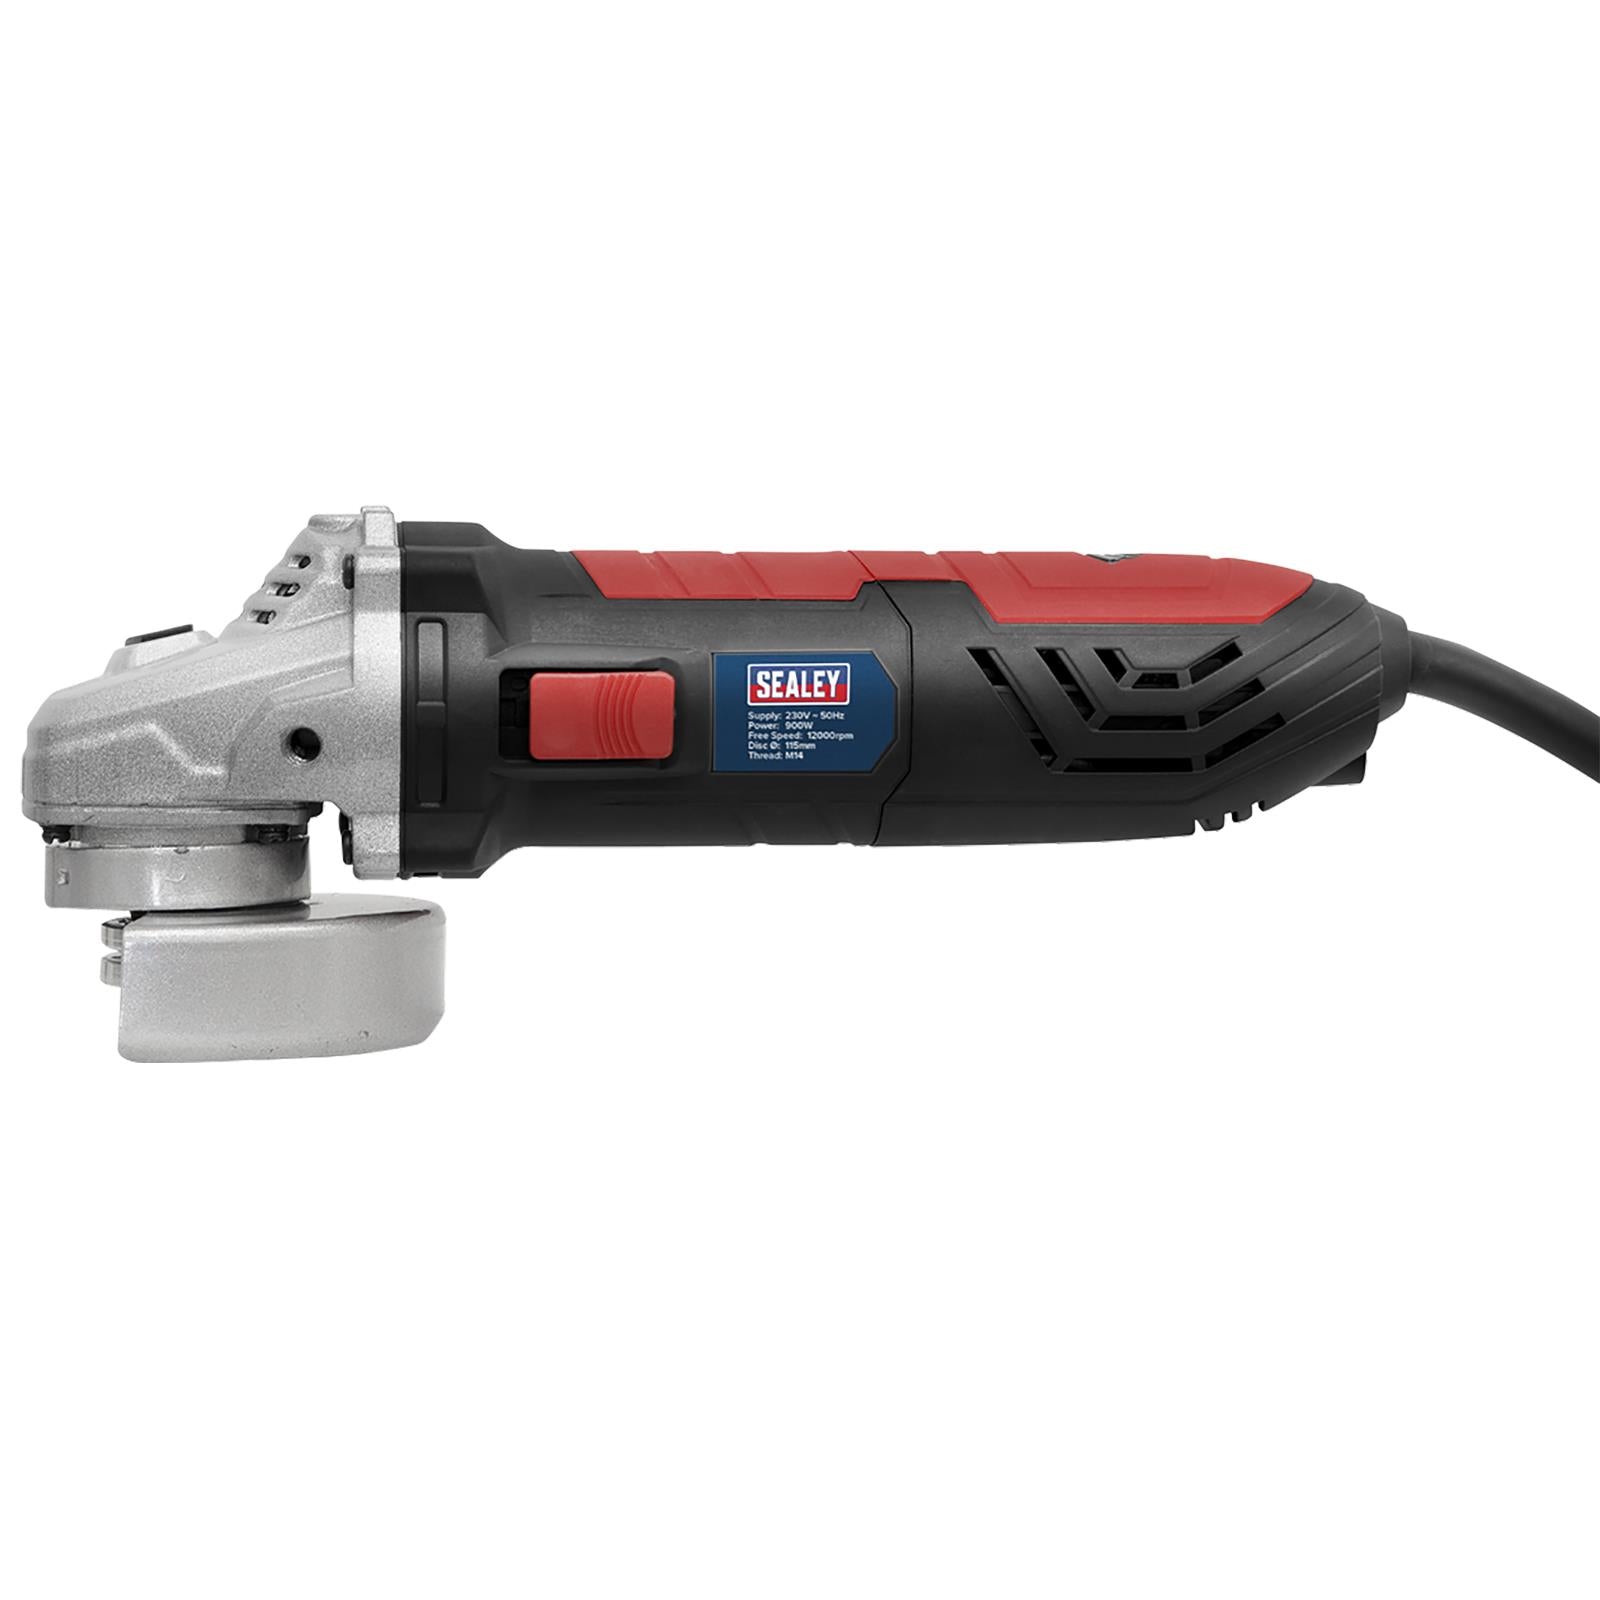 Sealey Angle Grinder 115mm 900W 230V with Side Handle Trade Use